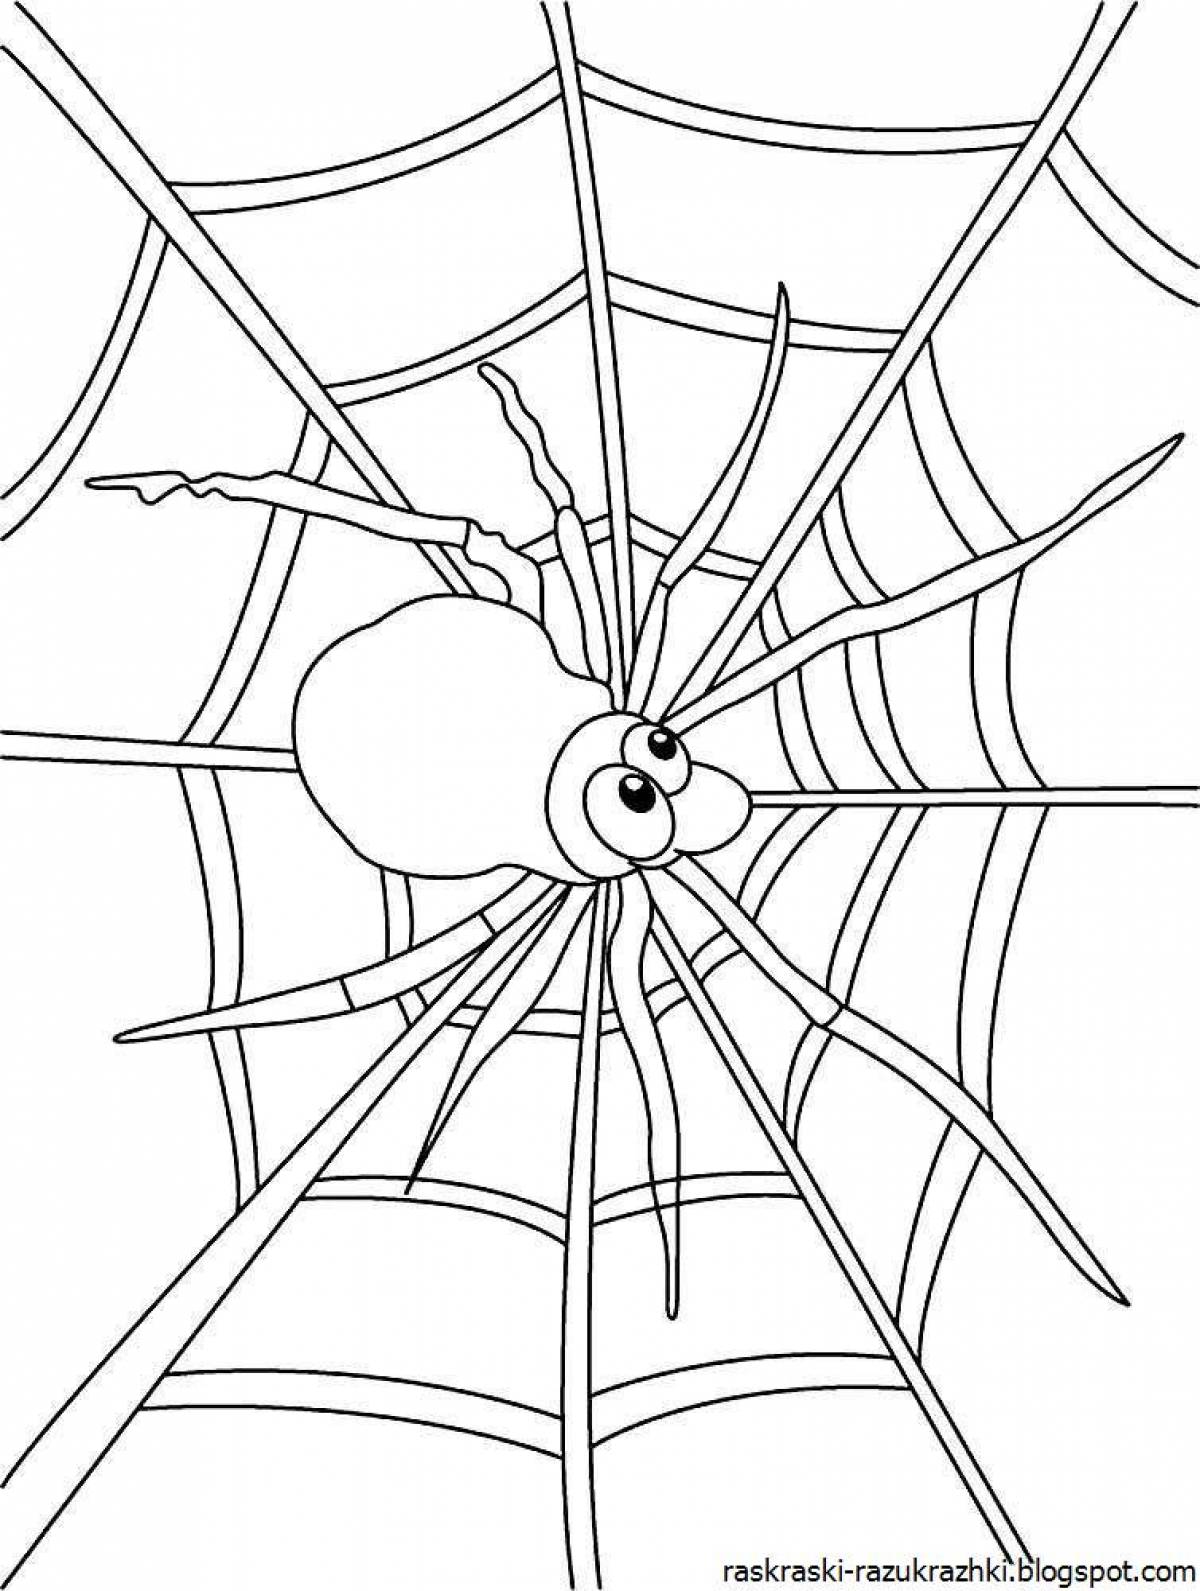 Wonderful spider coloring pages for kids